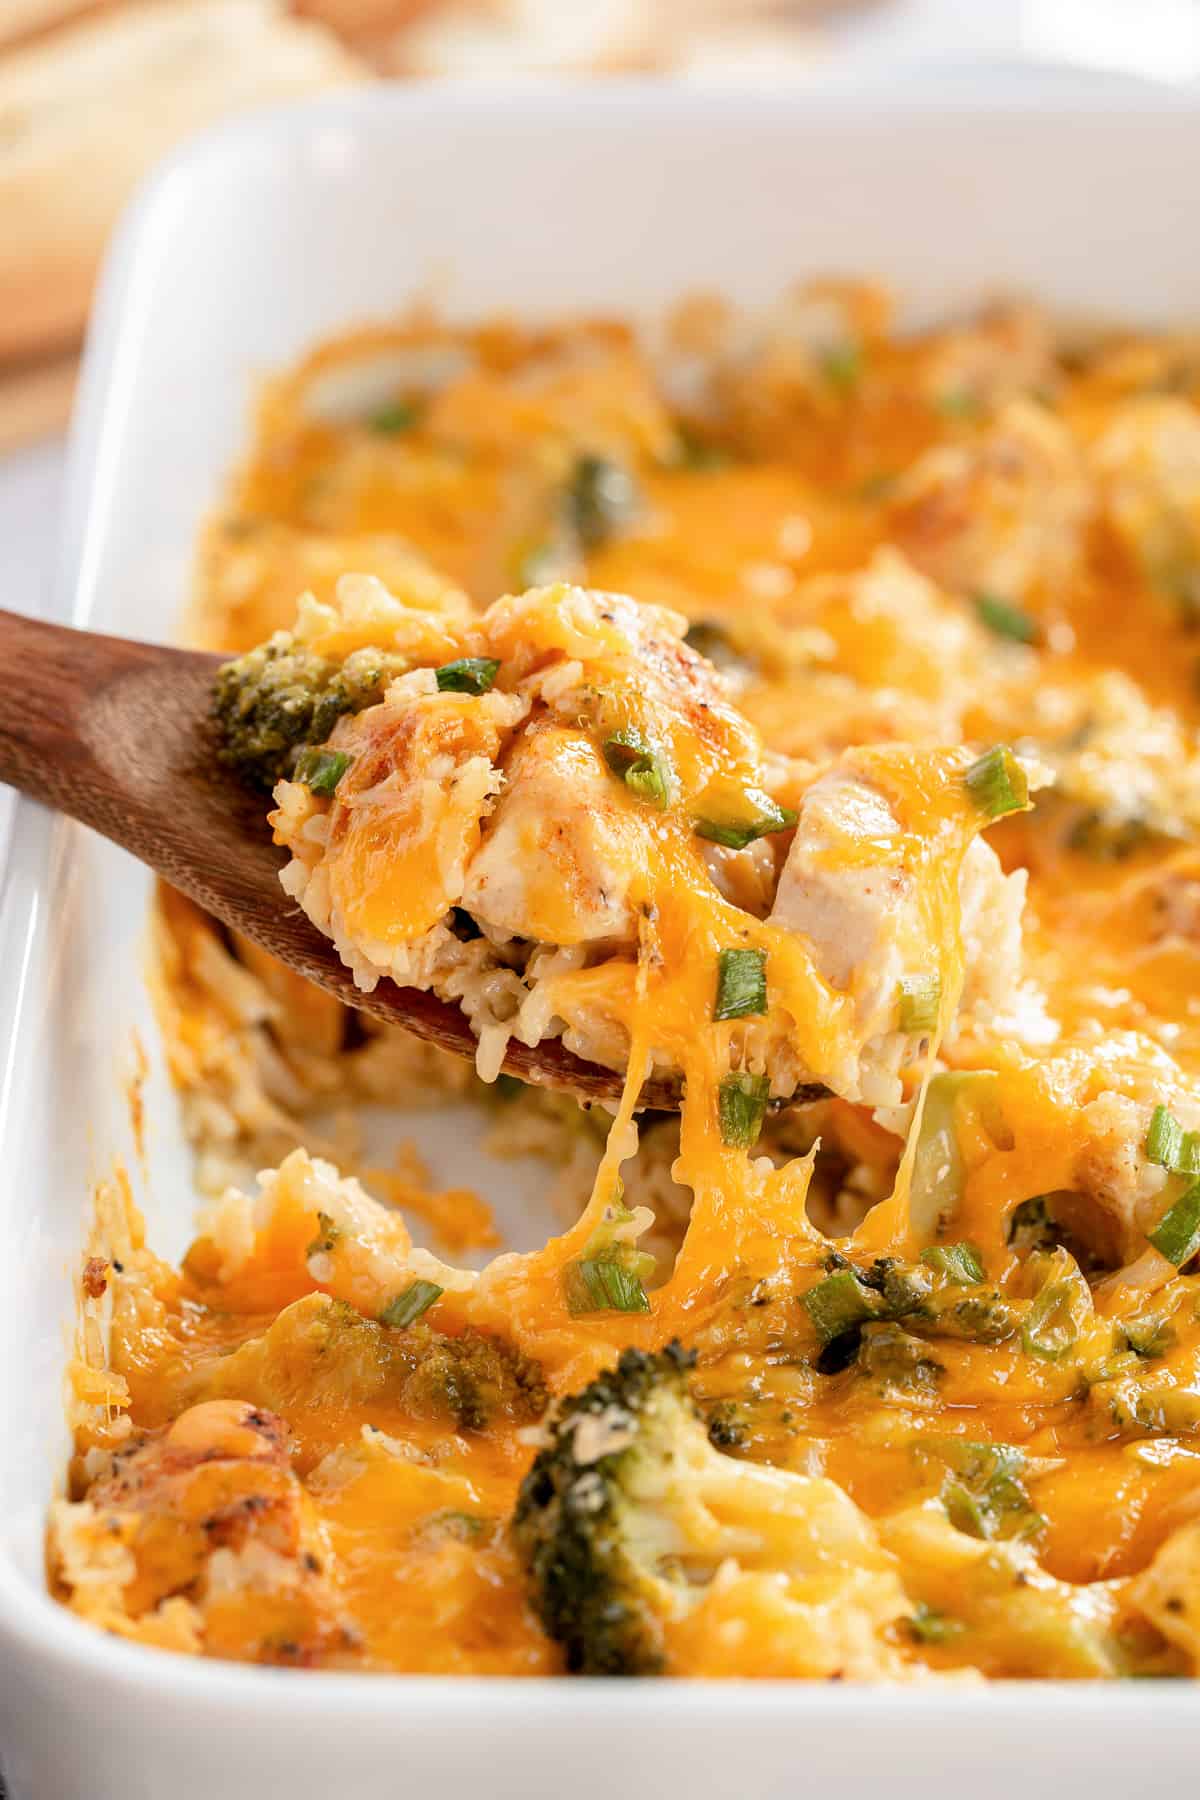 A spoon scoops Chicken Broccoli Rice Casserole from a baking dish.